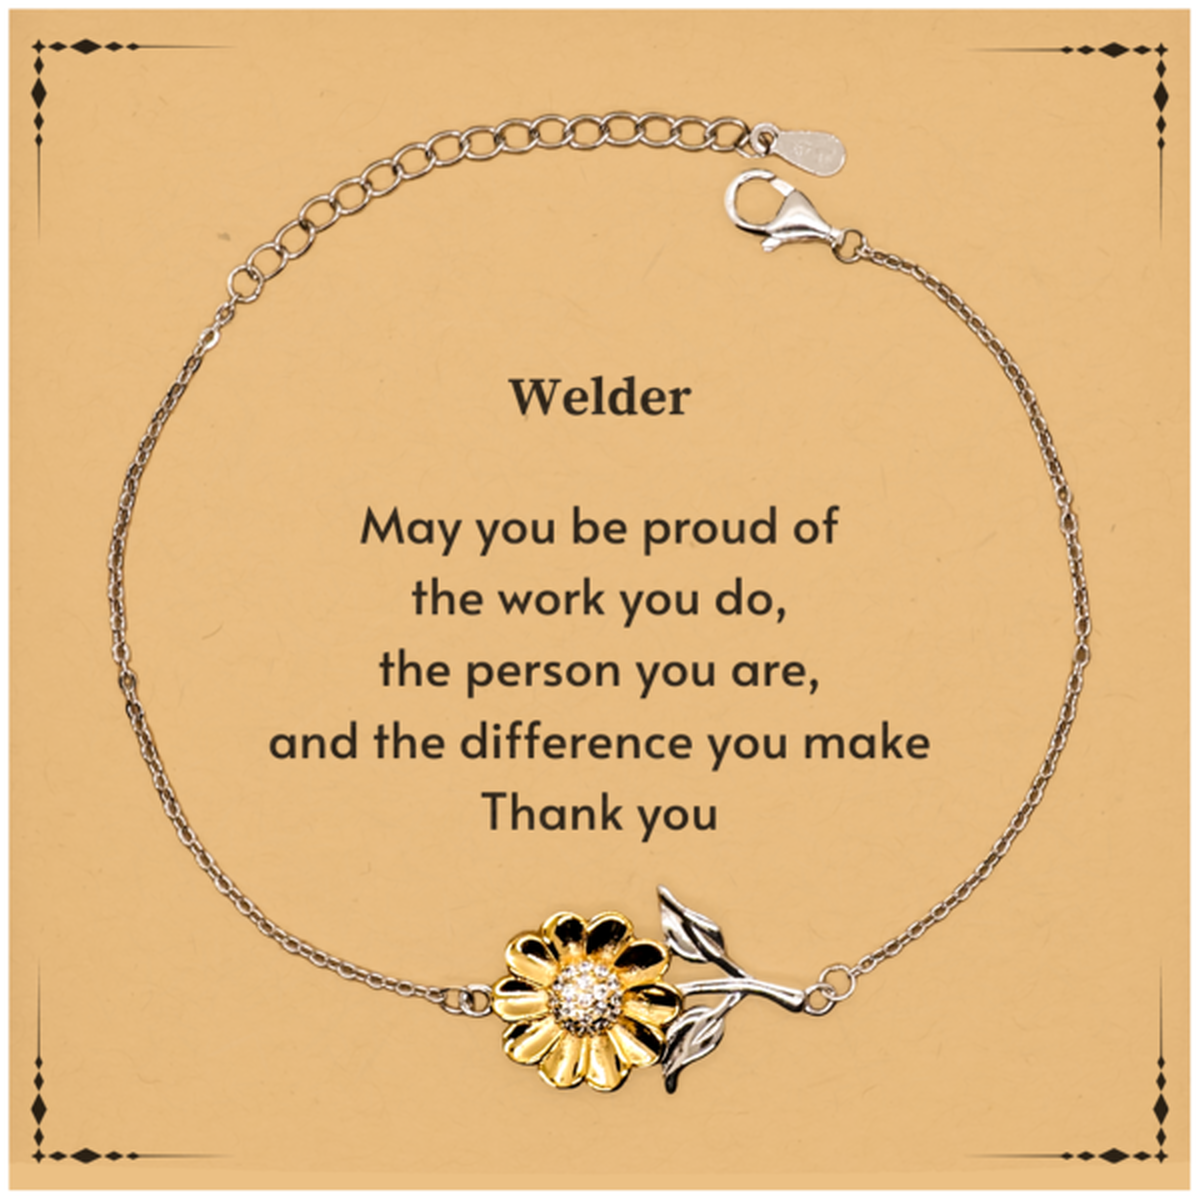 Heartwarming Sunflower Bracelet Retirement Coworkers Gifts for Welder, Welder May You be proud of the work you do, the person you are Gifts for Boss Men Women Friends